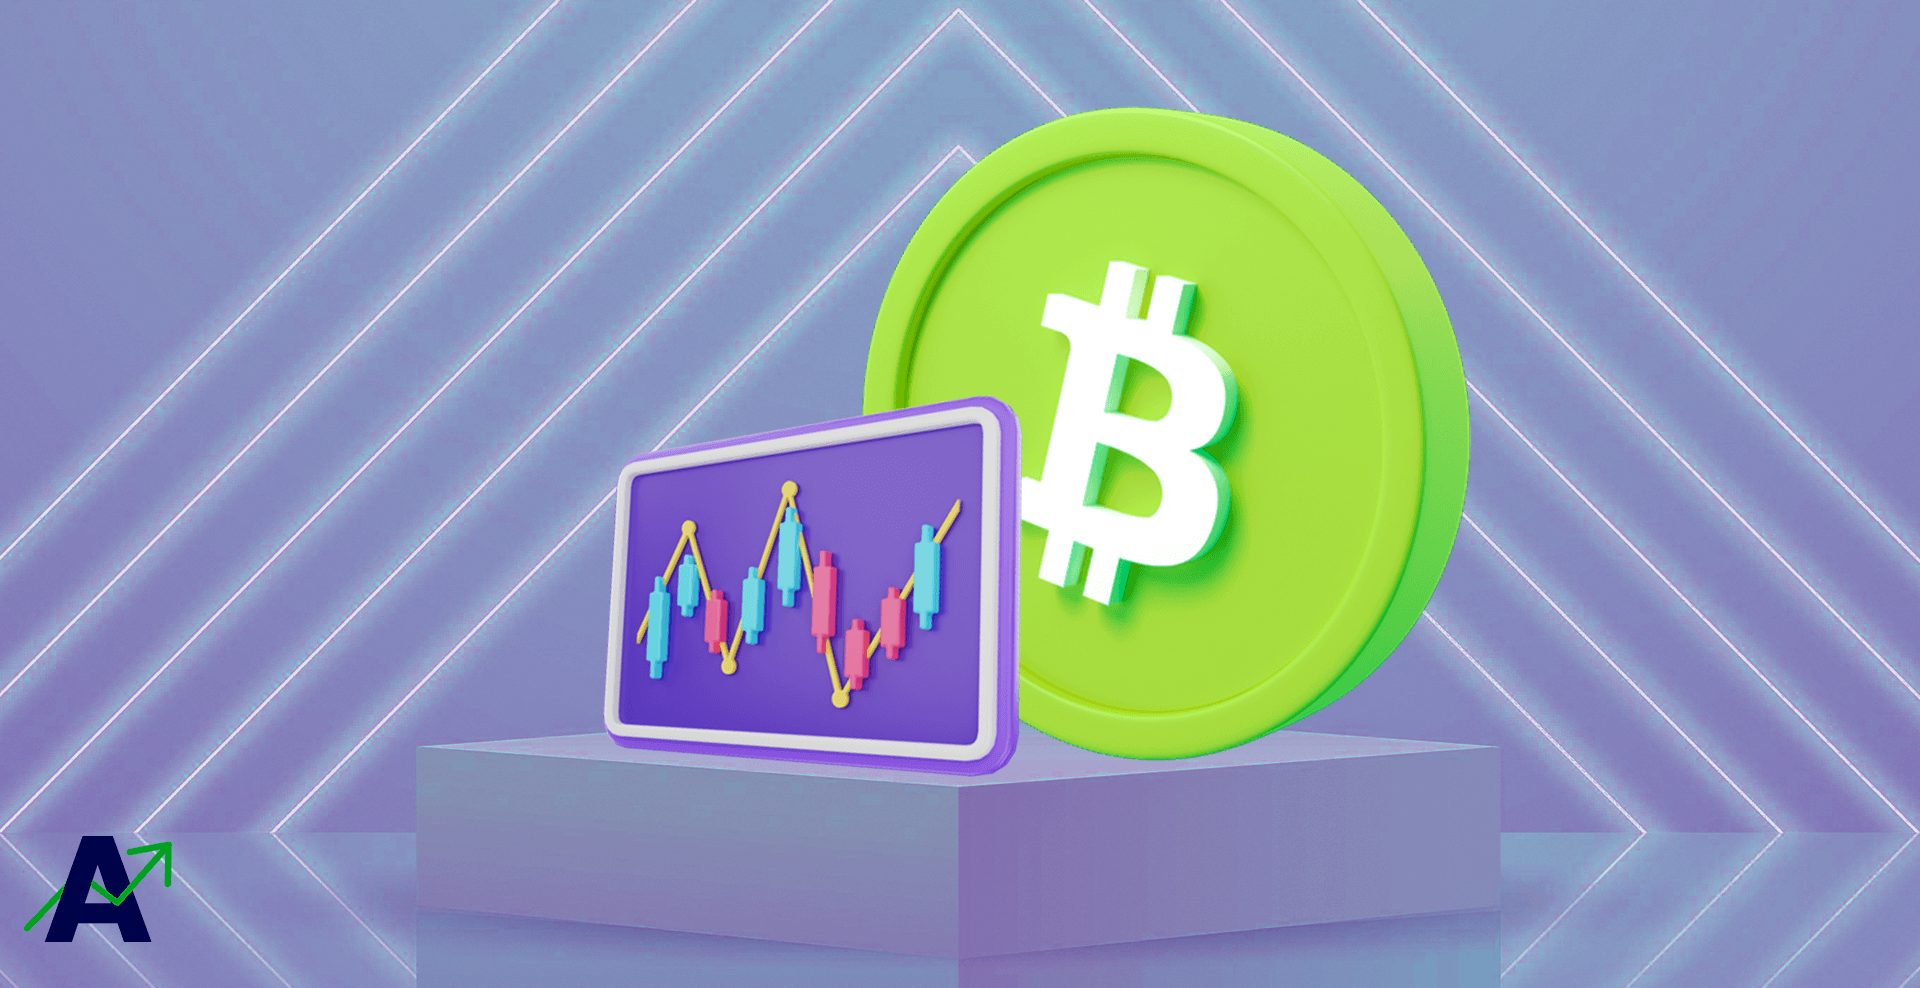 Bitcoin Cash (BCH) Price Prediction for 2022, 2023, 2024 & 2025